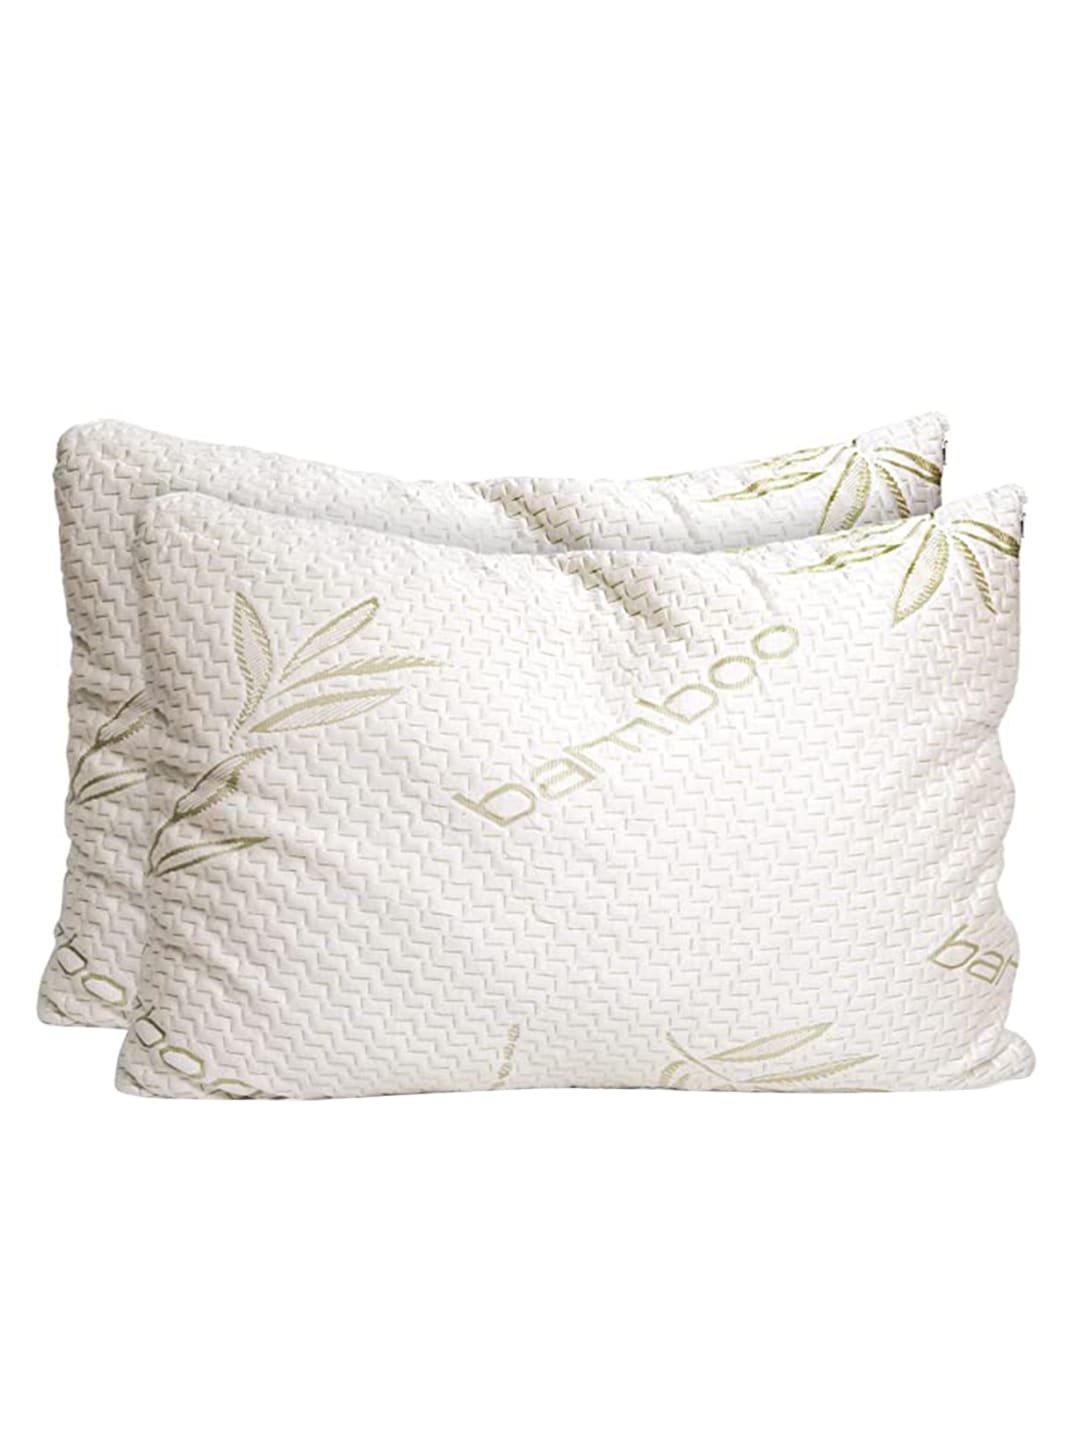 Sleepsia Set of 2 White & Green Textured Memory Foam Soft Bed Pillow Price in India